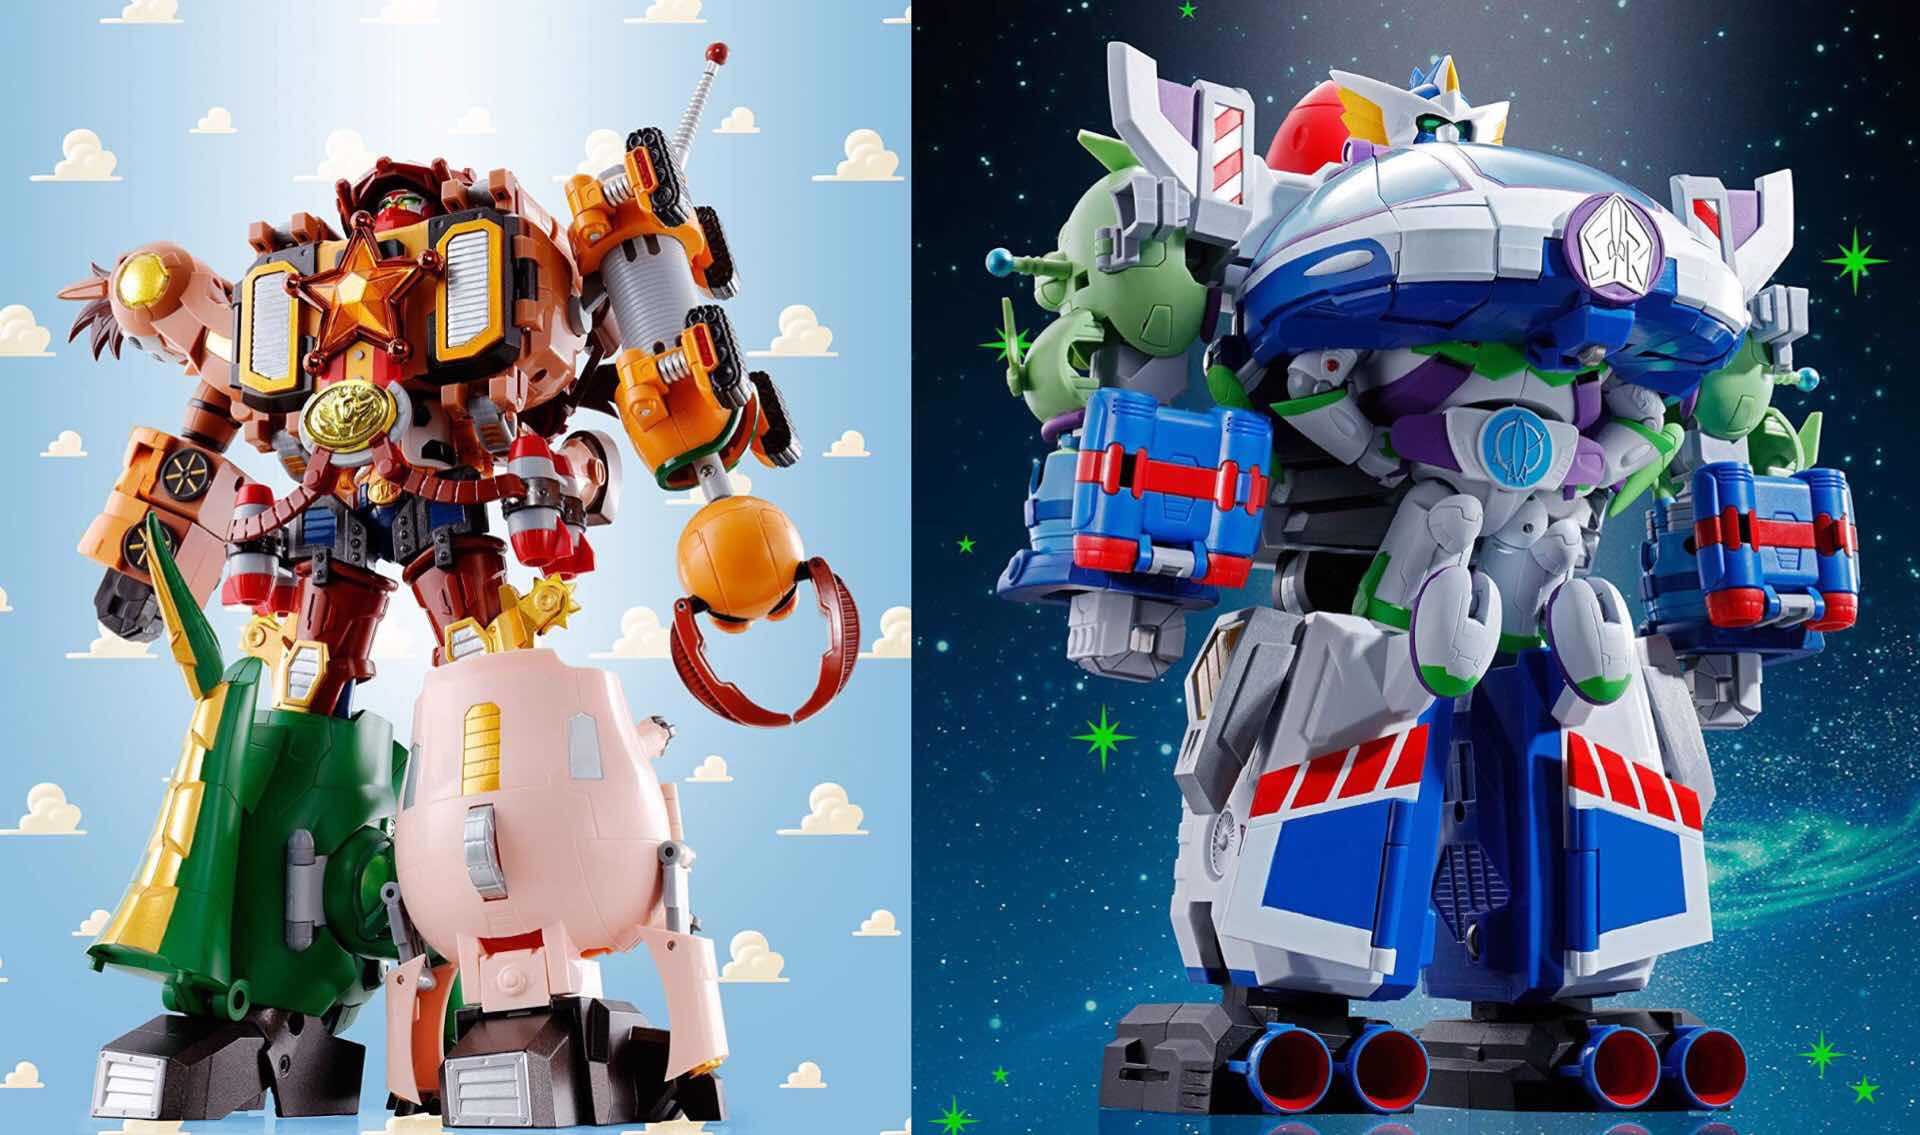 Disney and Bandai's Toy Story-themed mecha sets. (~$140 each)